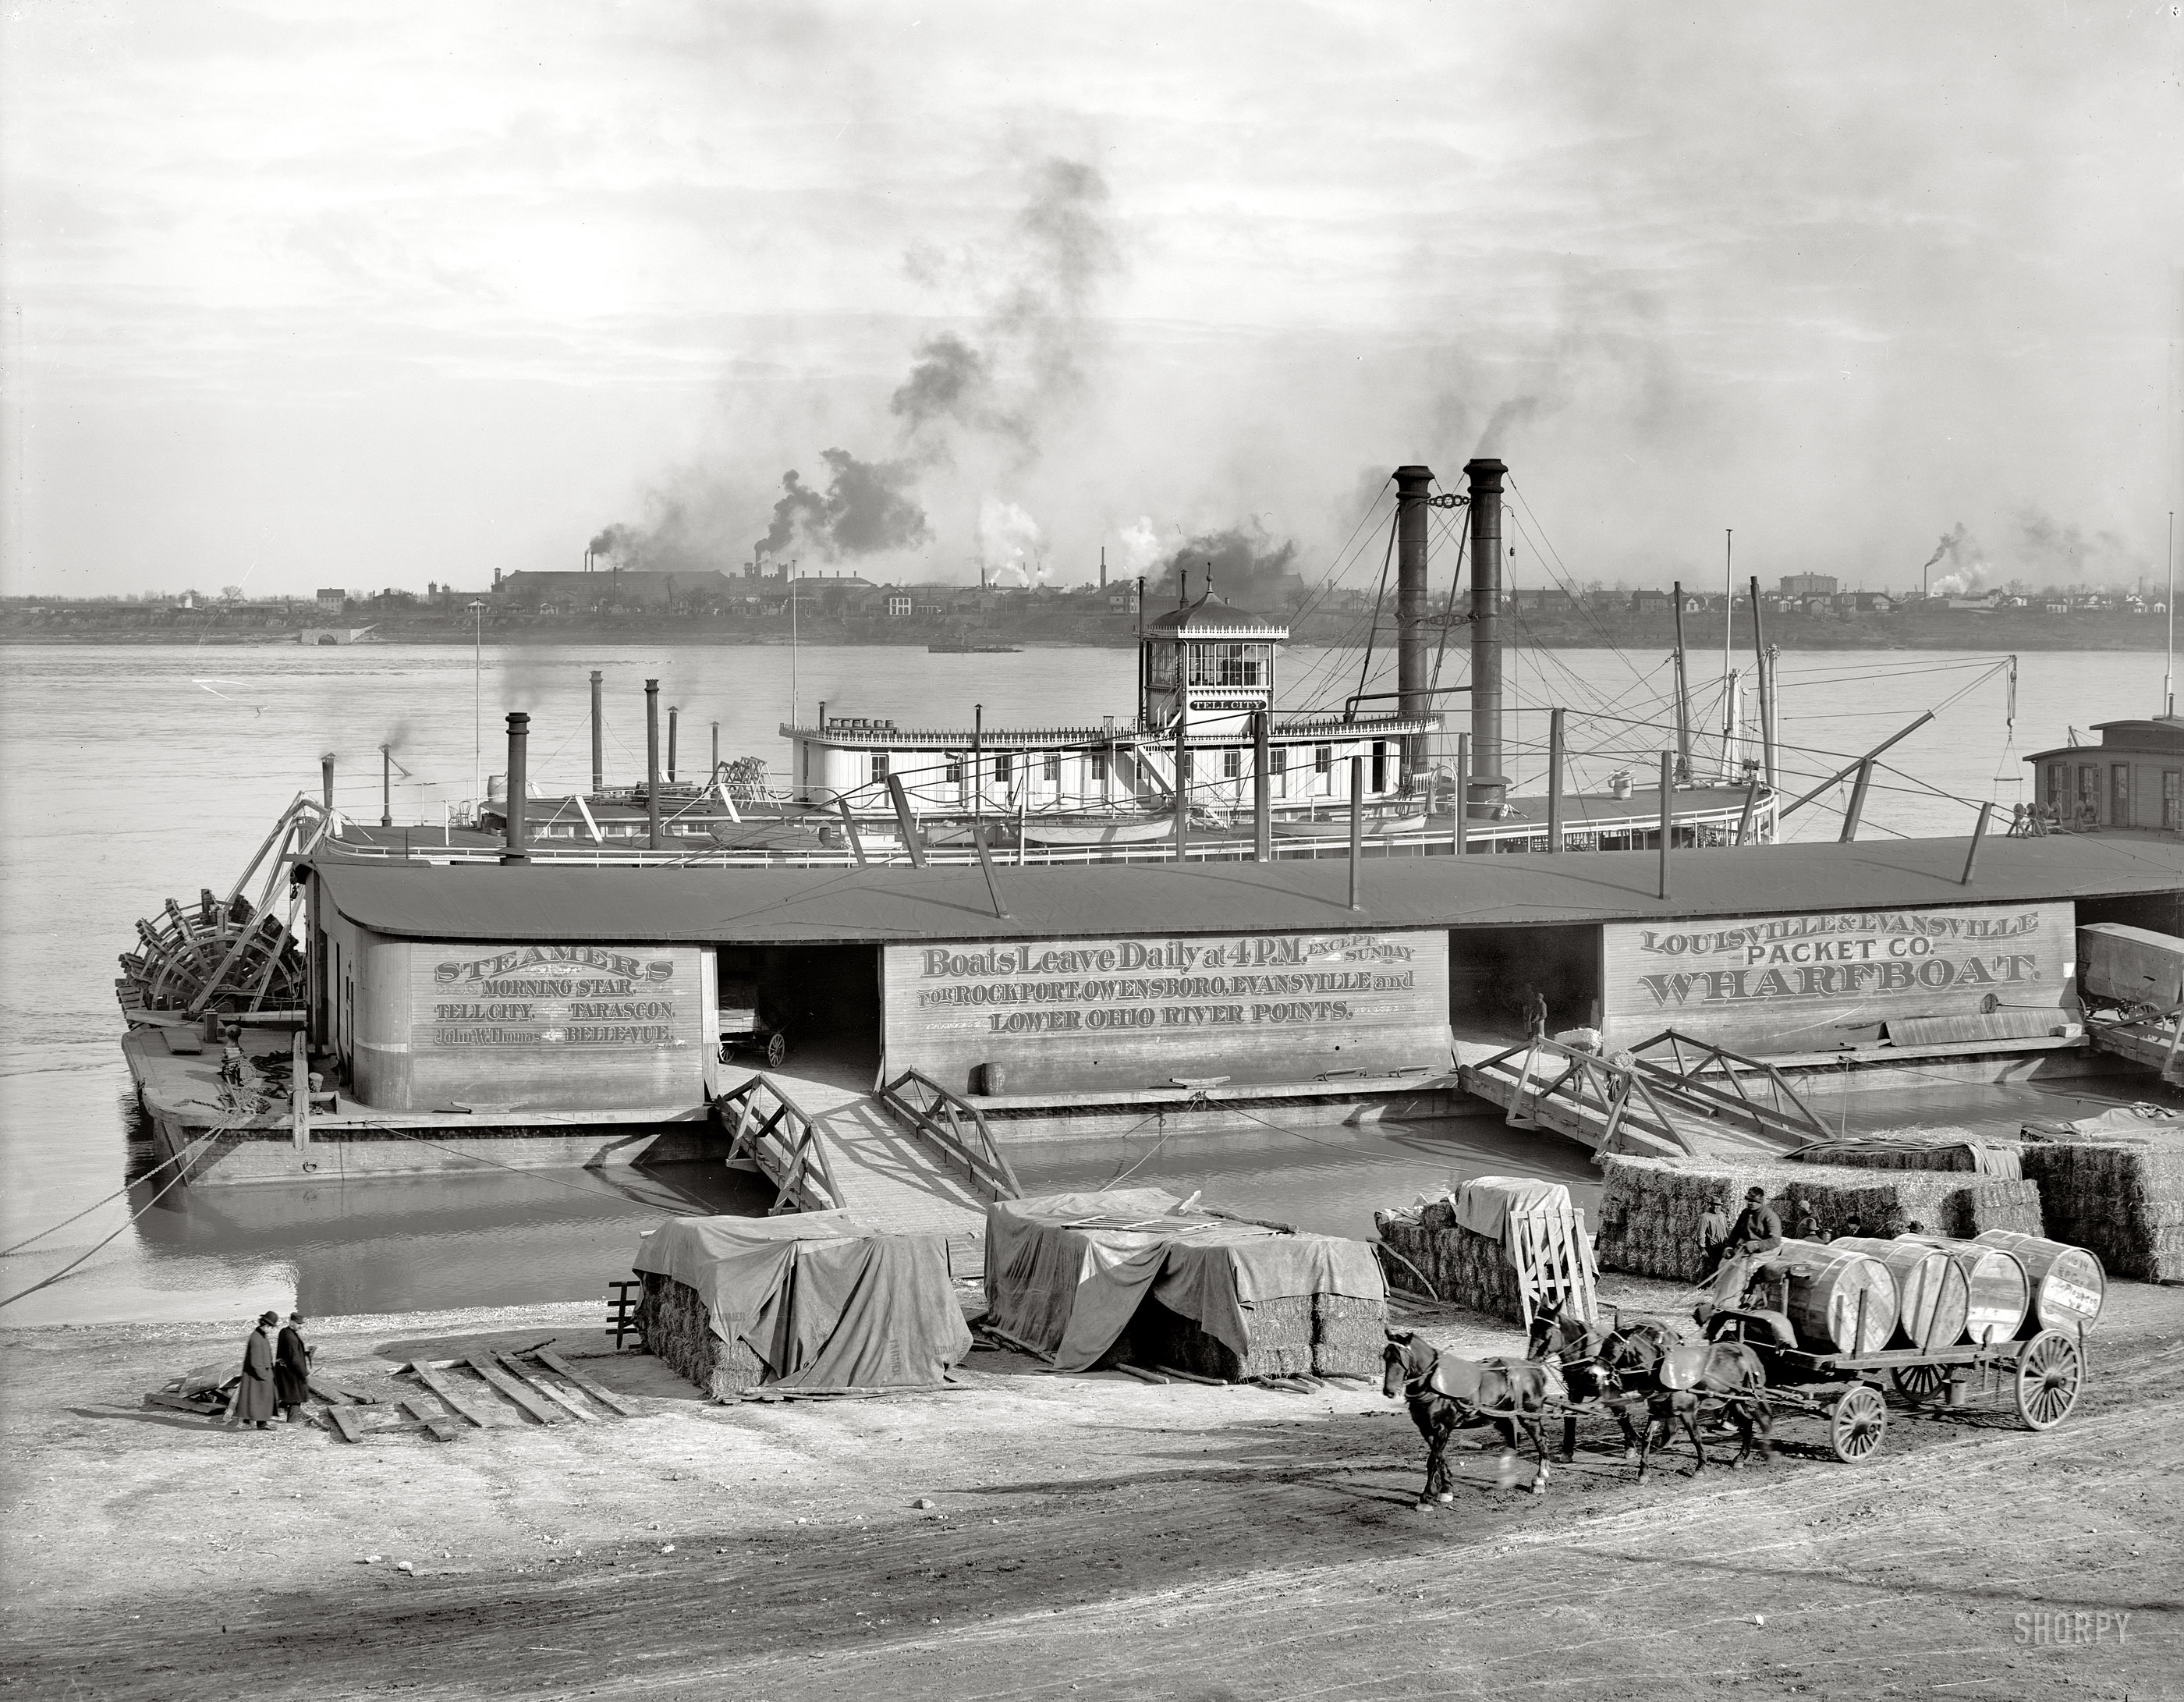 The Ohio River at Louisville, Kentucky, circa 1905. "The levee at Louisville." 8x10 inch dry plate glass negative, Detroit Publishing Company. View full size.